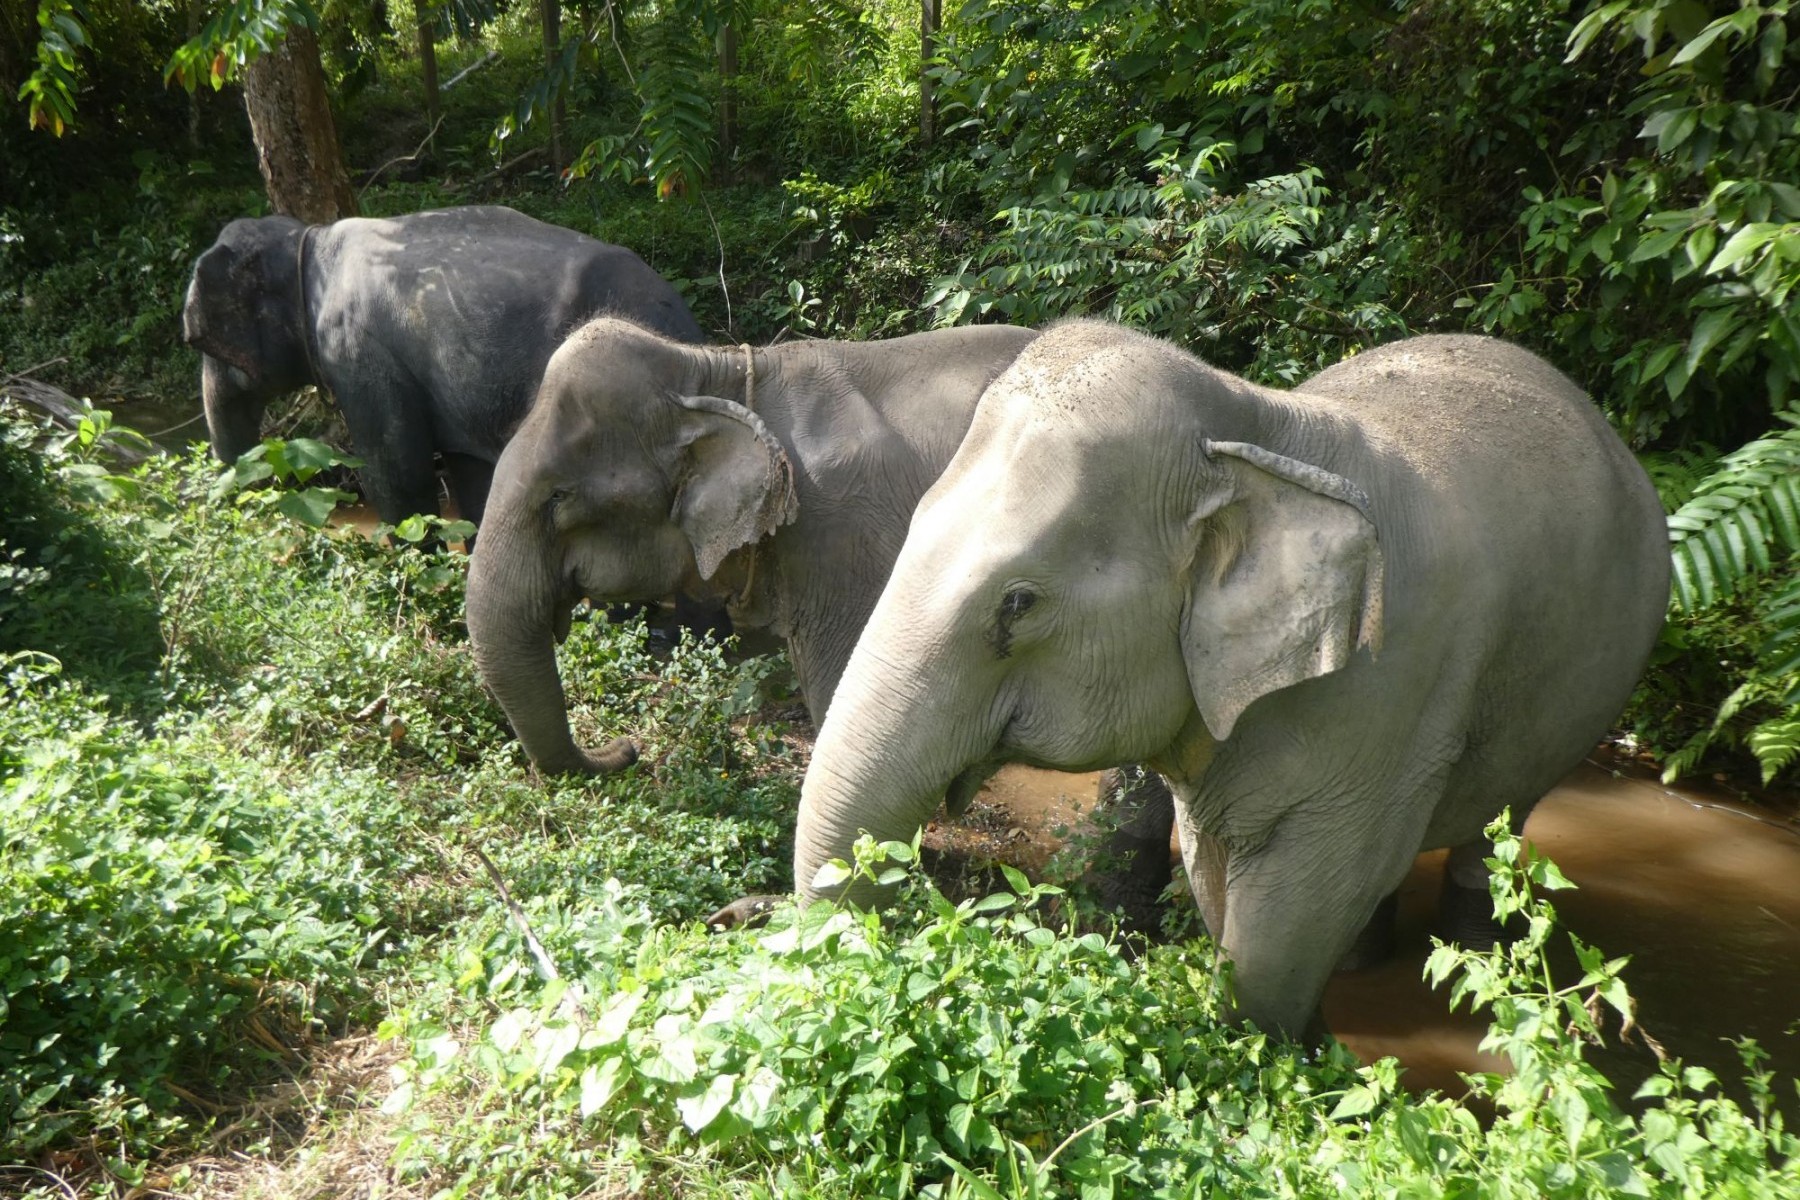 Tanwa (left) with Sow (middle) and Jahn (right) at Following Giants. Tanwa is a 28-year-old male elephant who was previously used in the brutal logging industry. He was transported by ferry to Following Giants in Nov, 2019. Credit: World Animal Protection